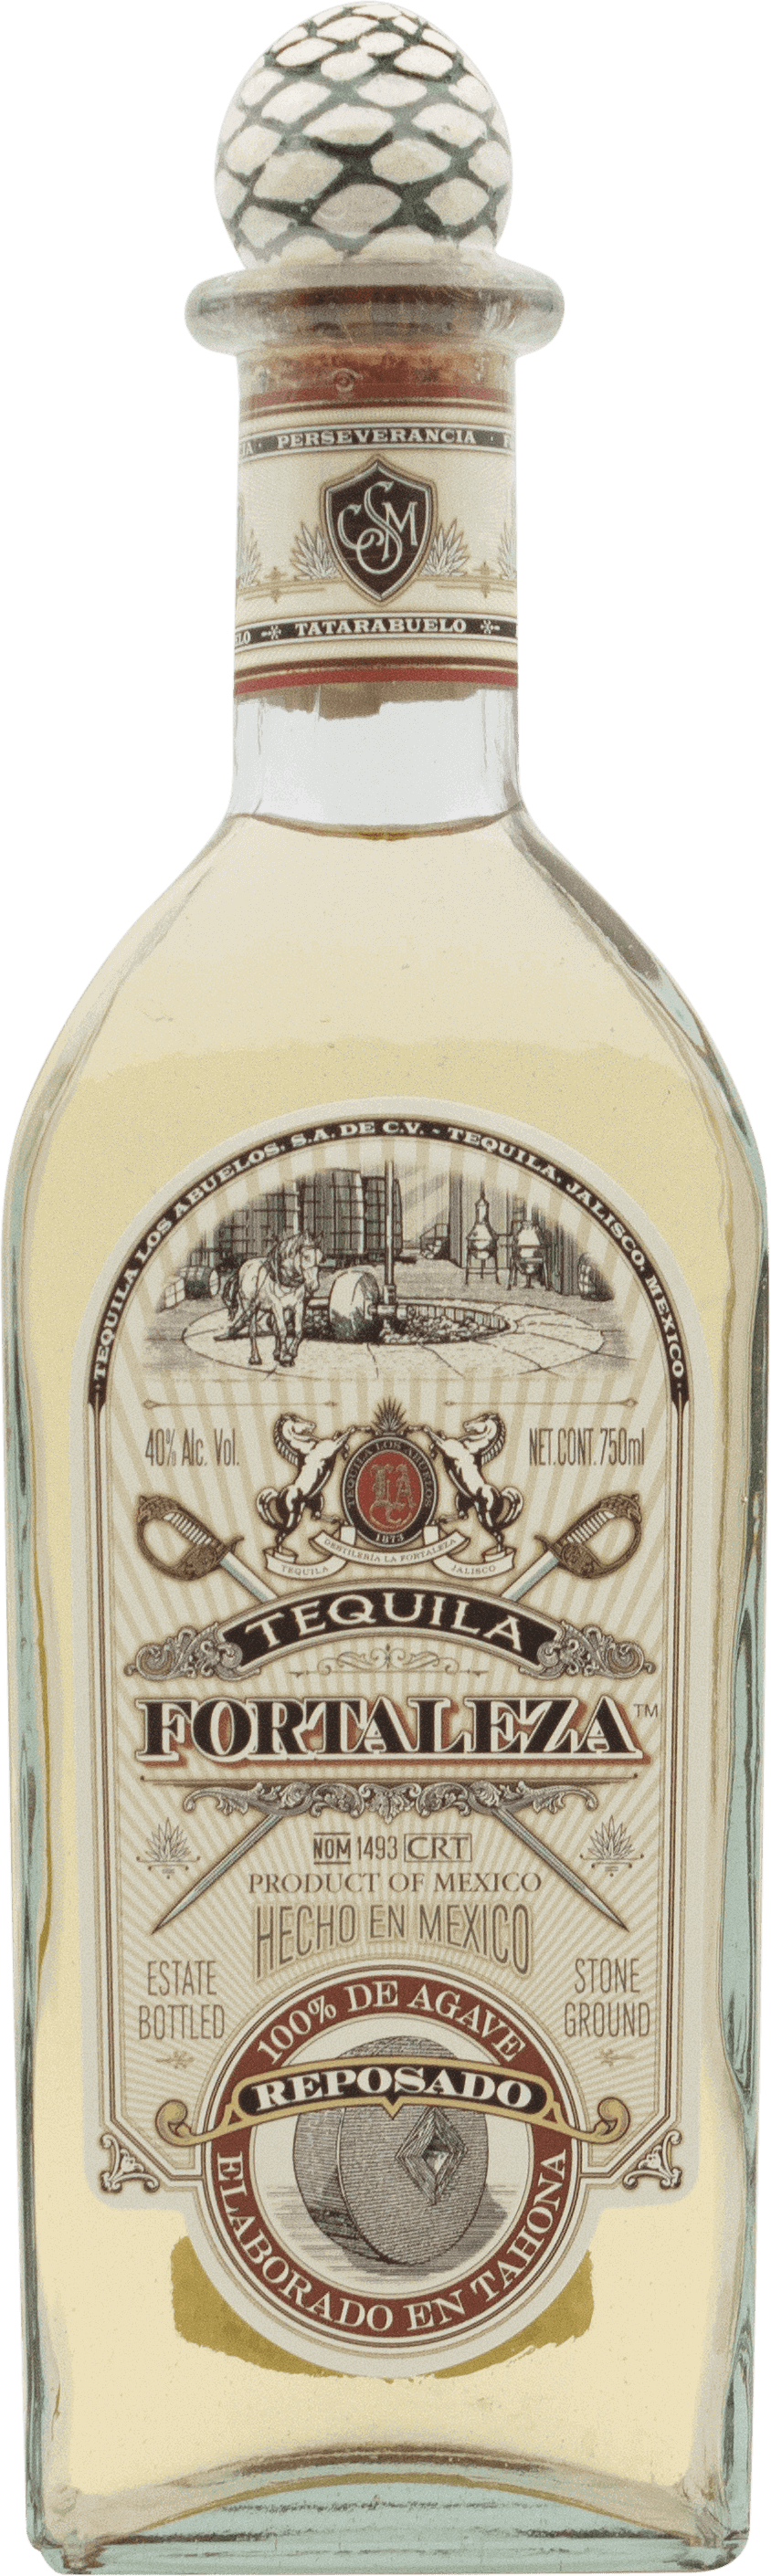 An image of a bottle of Fortaleza Reposado Tequila